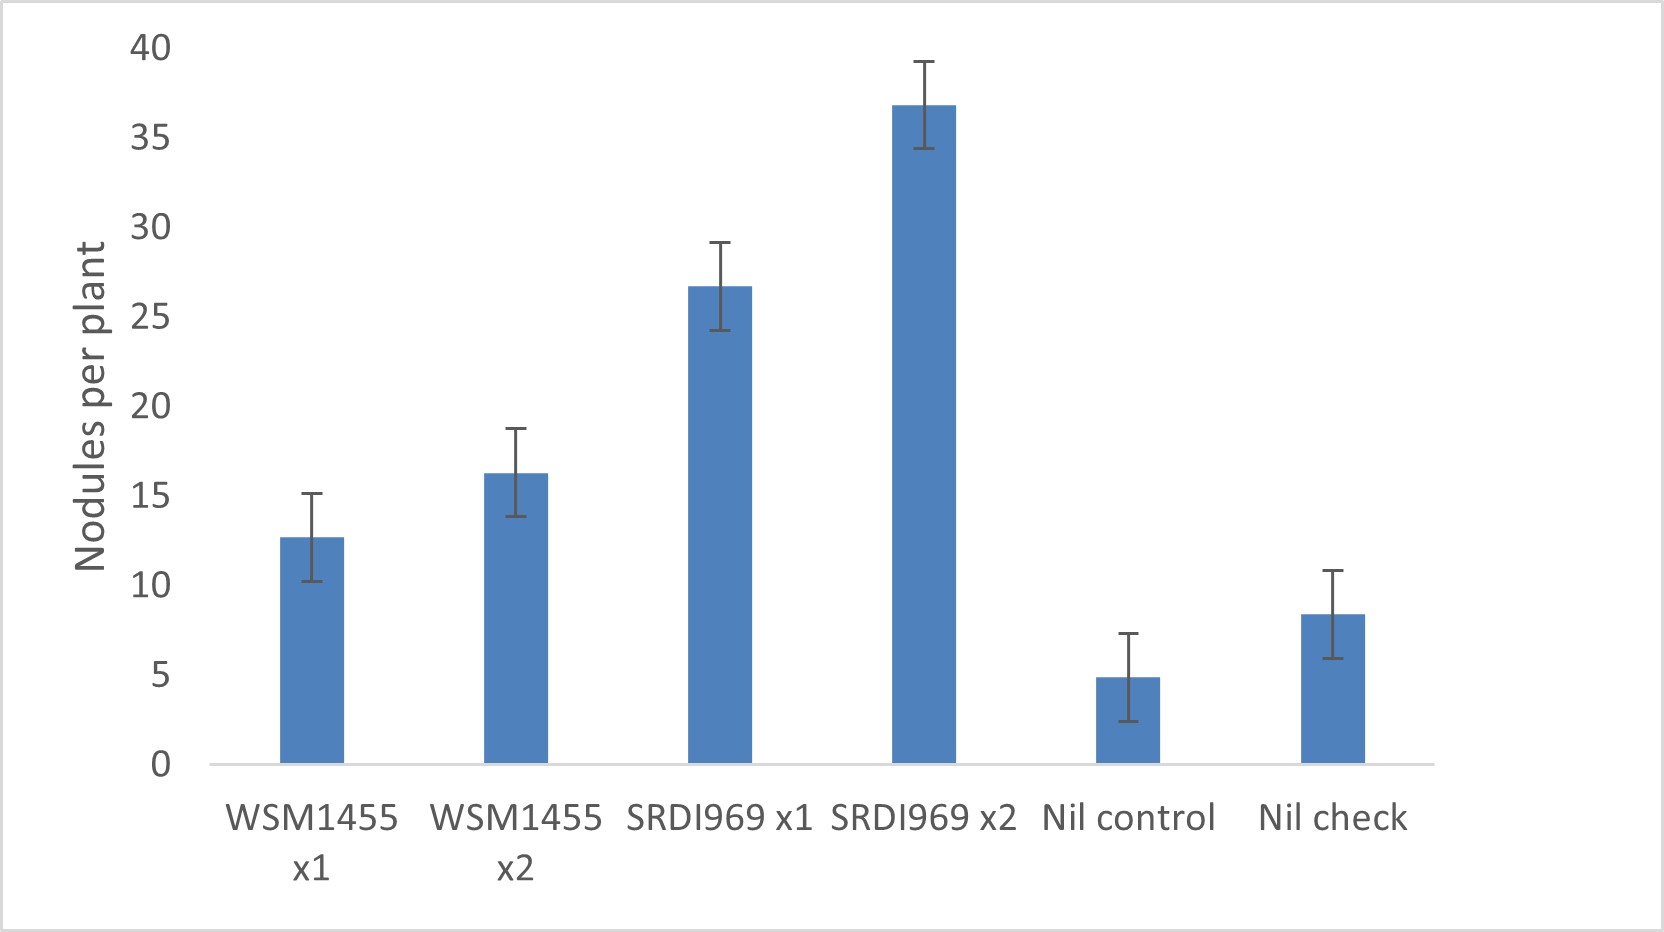 Figure 3. The effect of rhizobia strain and peat inoculation rate on faba bean nodulation at Winchelsea in 2020, compared to uninoculated and cross-contamination controls. Error bars are the Lsd of a one-way ANOVA (P<0.05).